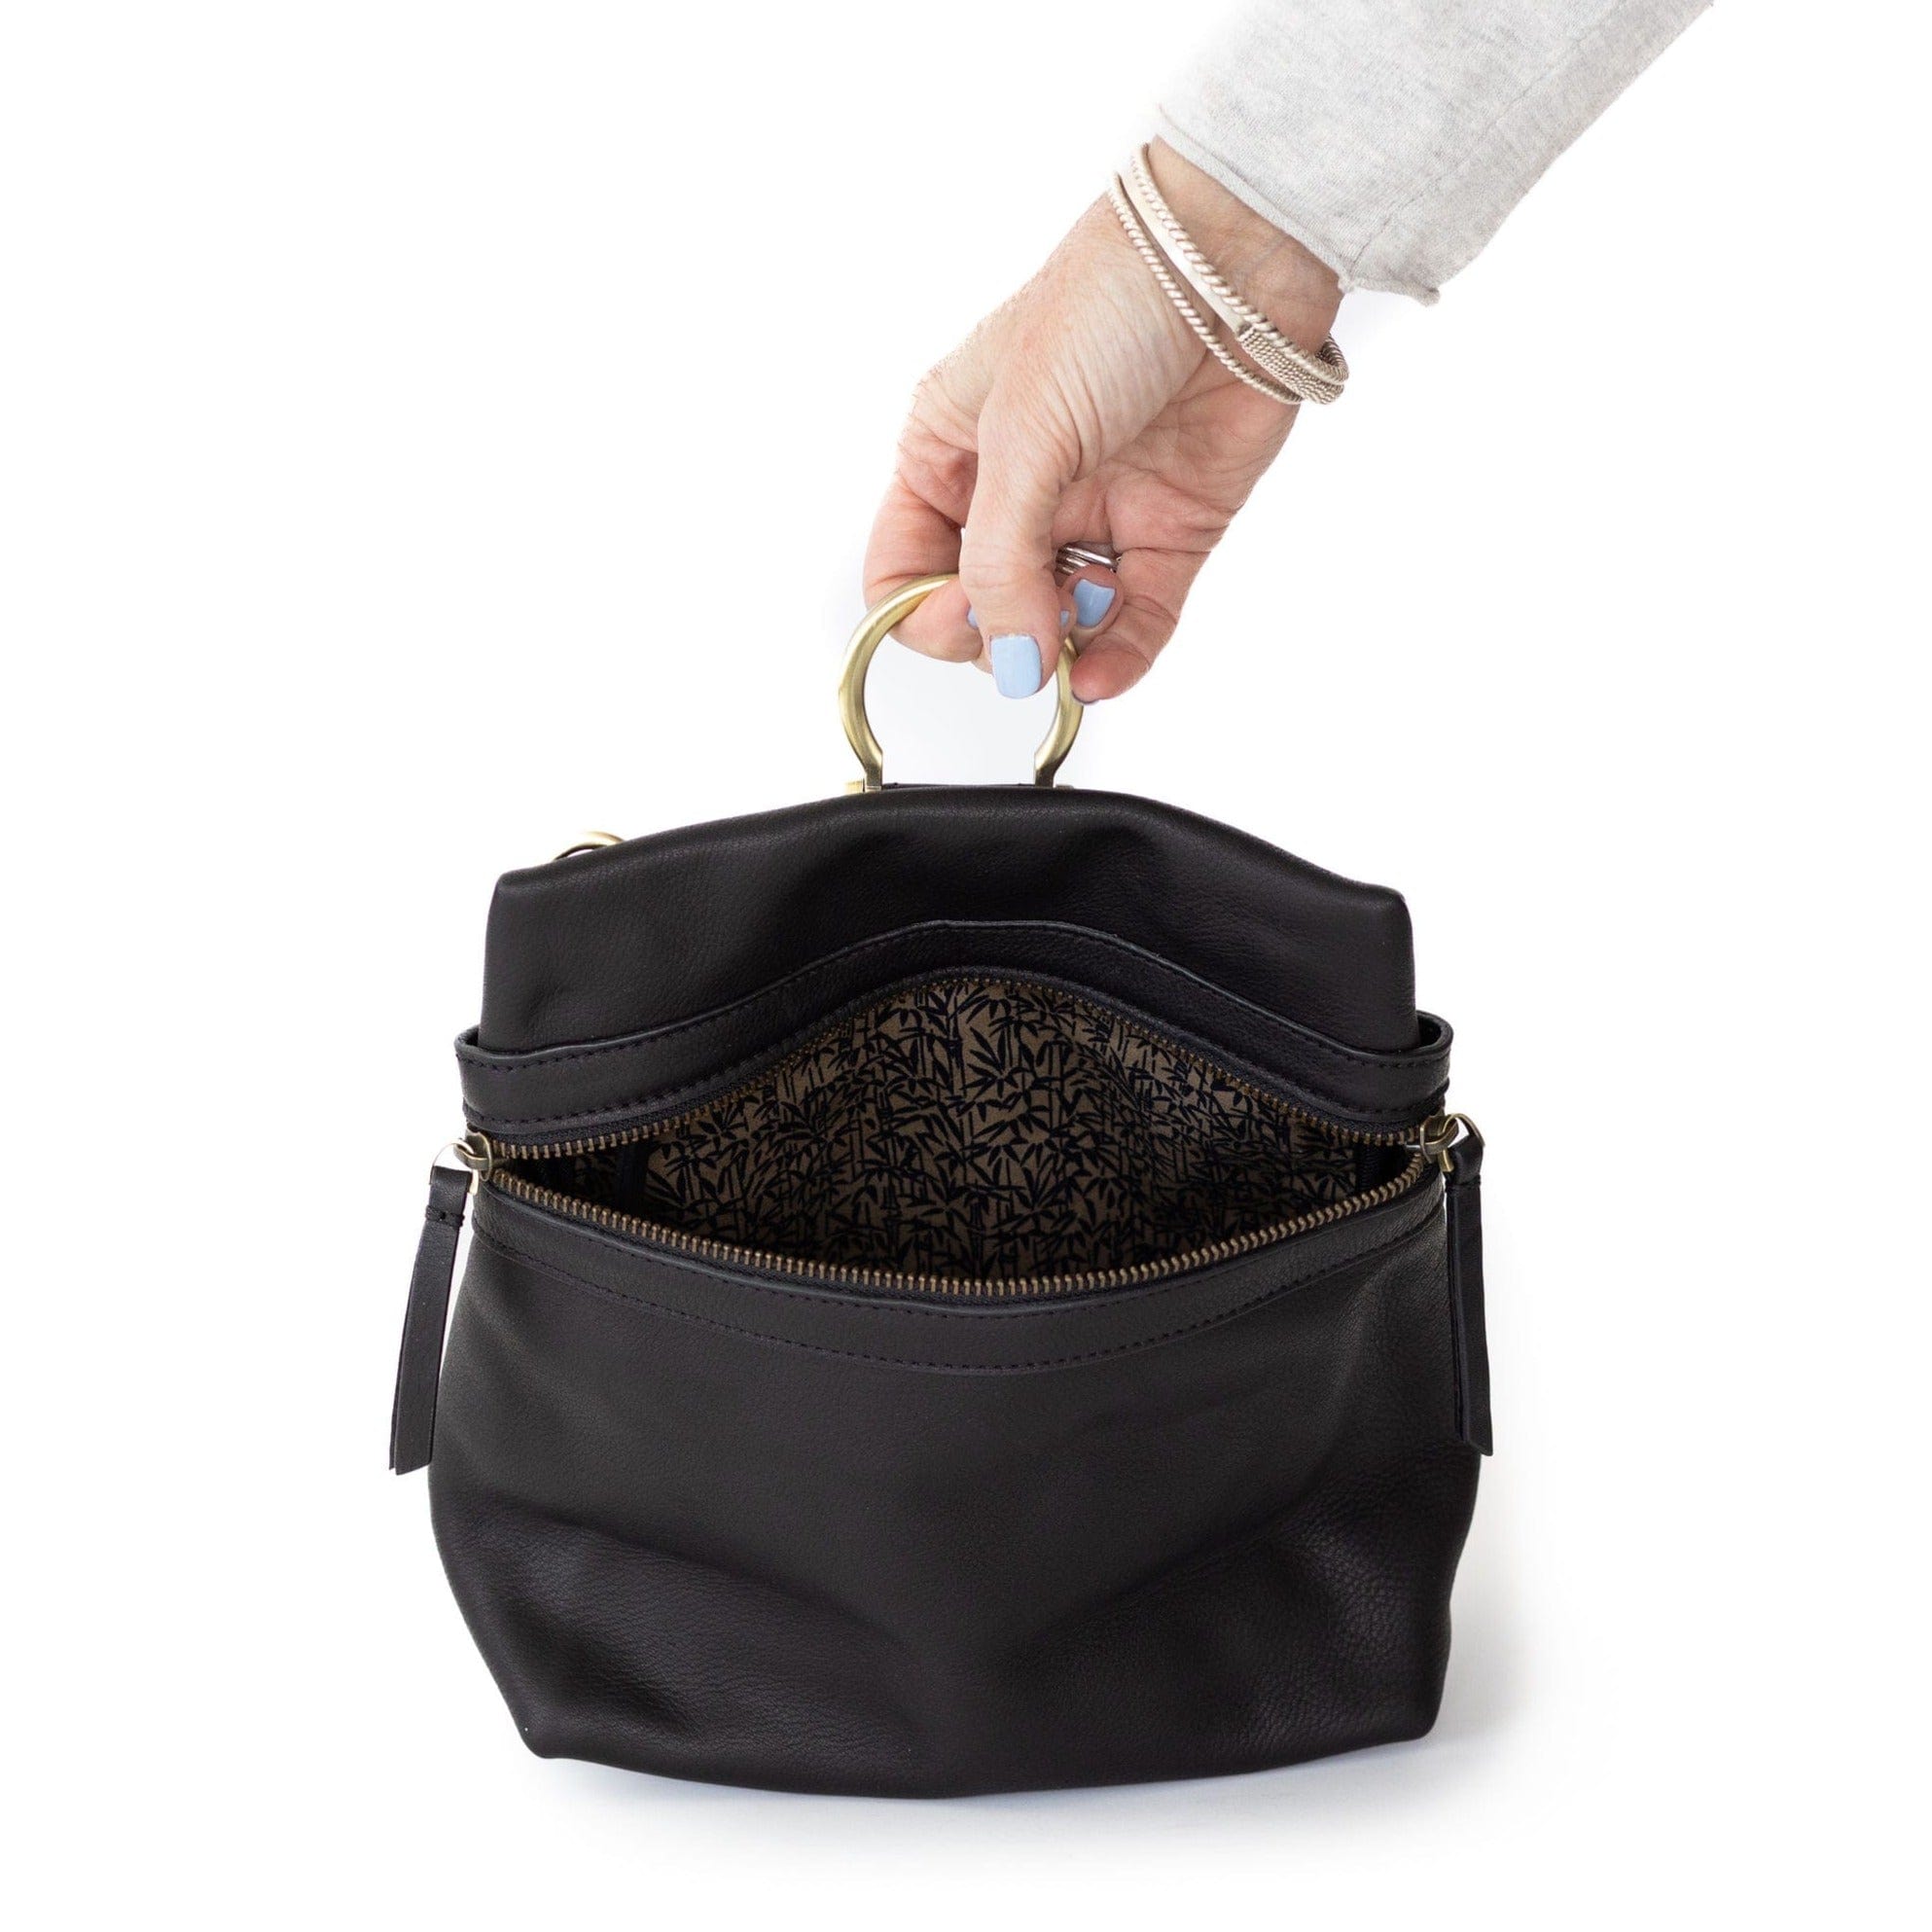 Pepper Pouch | Anya Hindmarch US